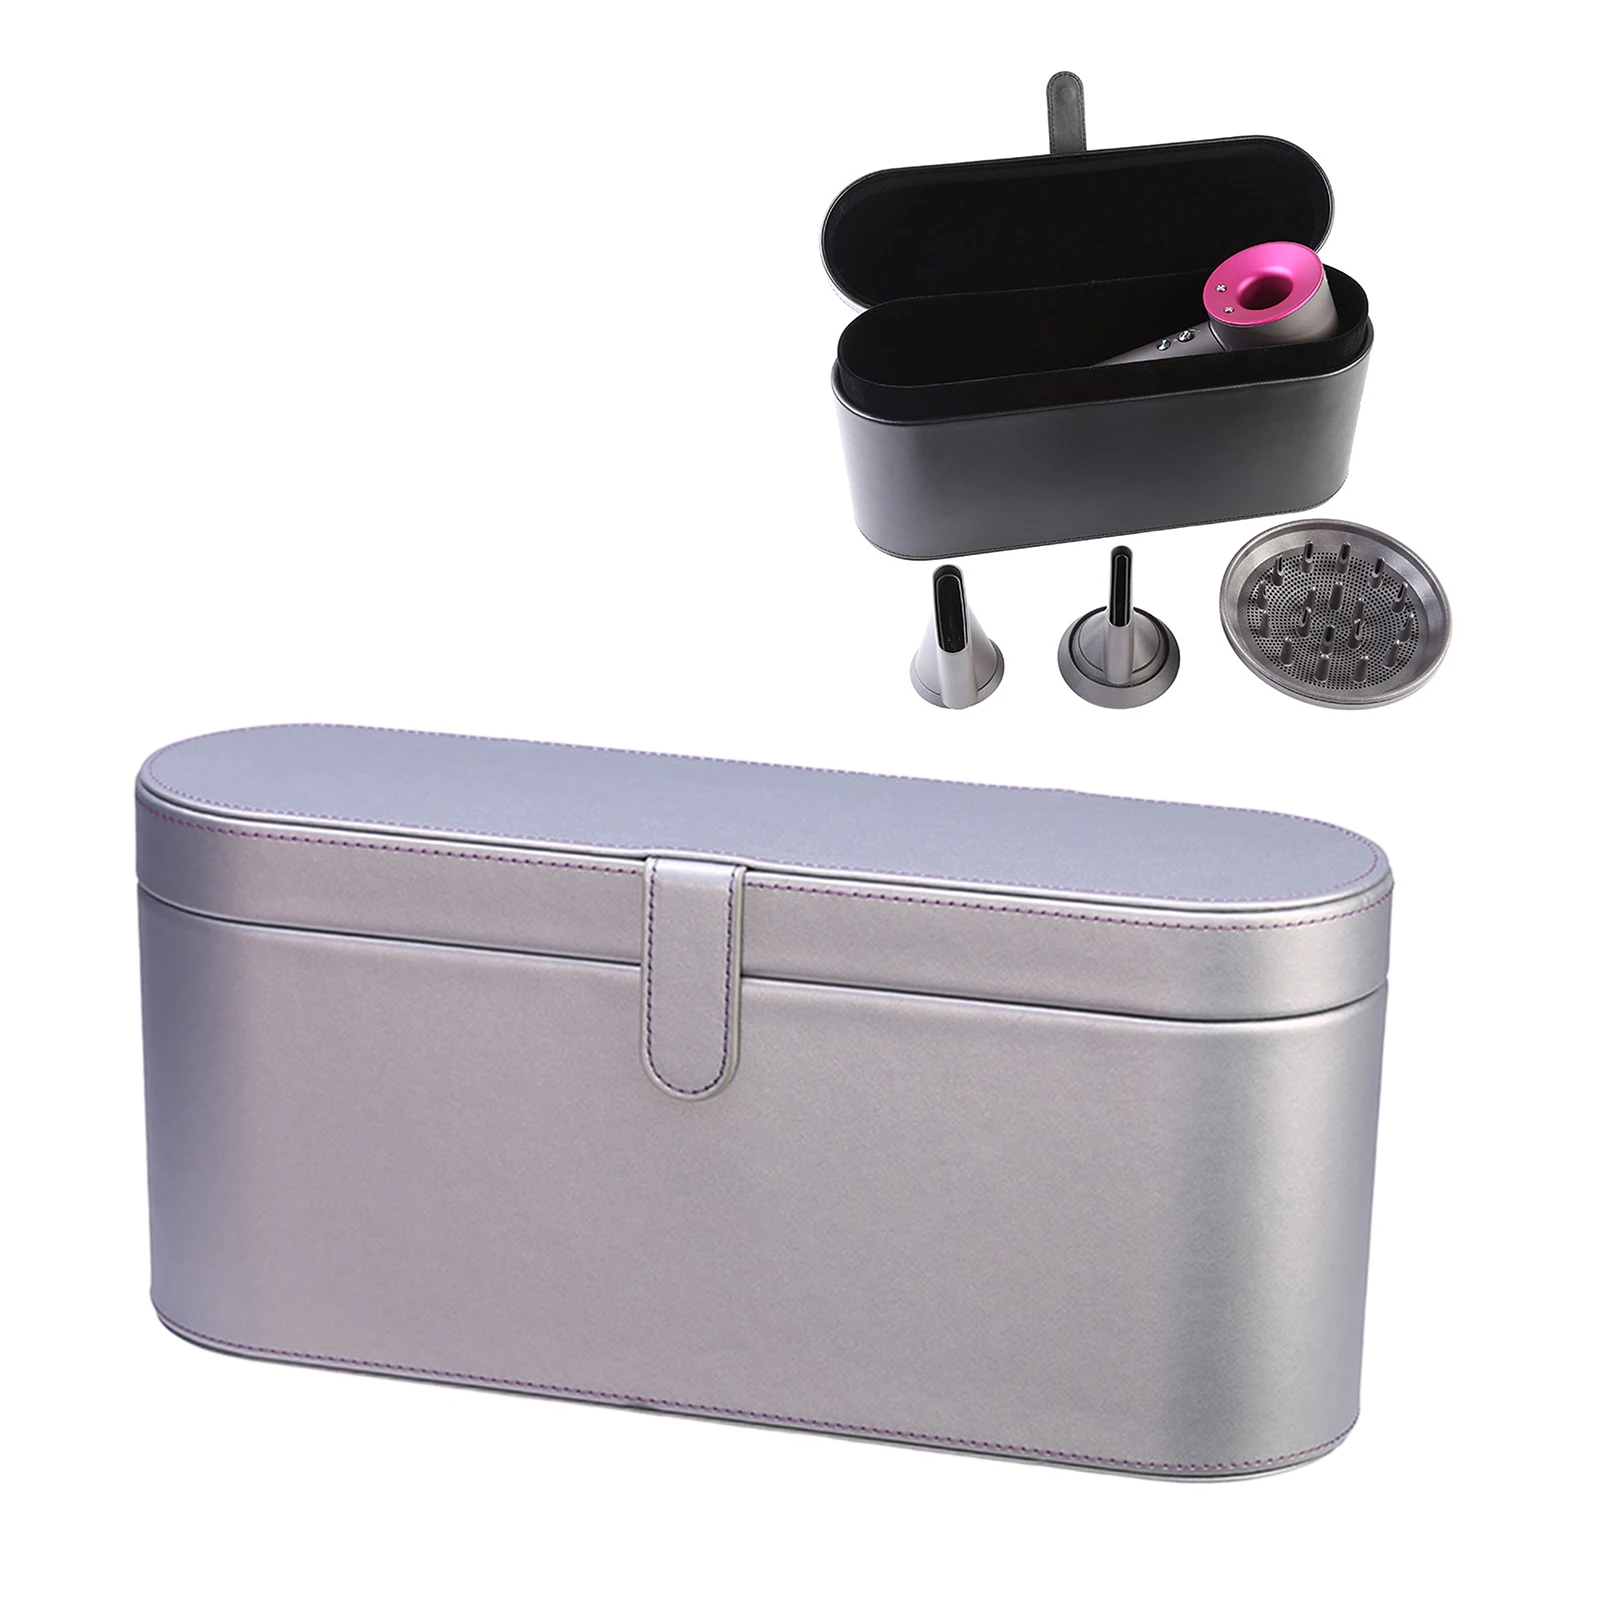 Portable PU Leather Hair Dryer Storage Box for Dyson Supersonic Hairdryer Compatible Hot Air Brush Accessories Organizer Bags